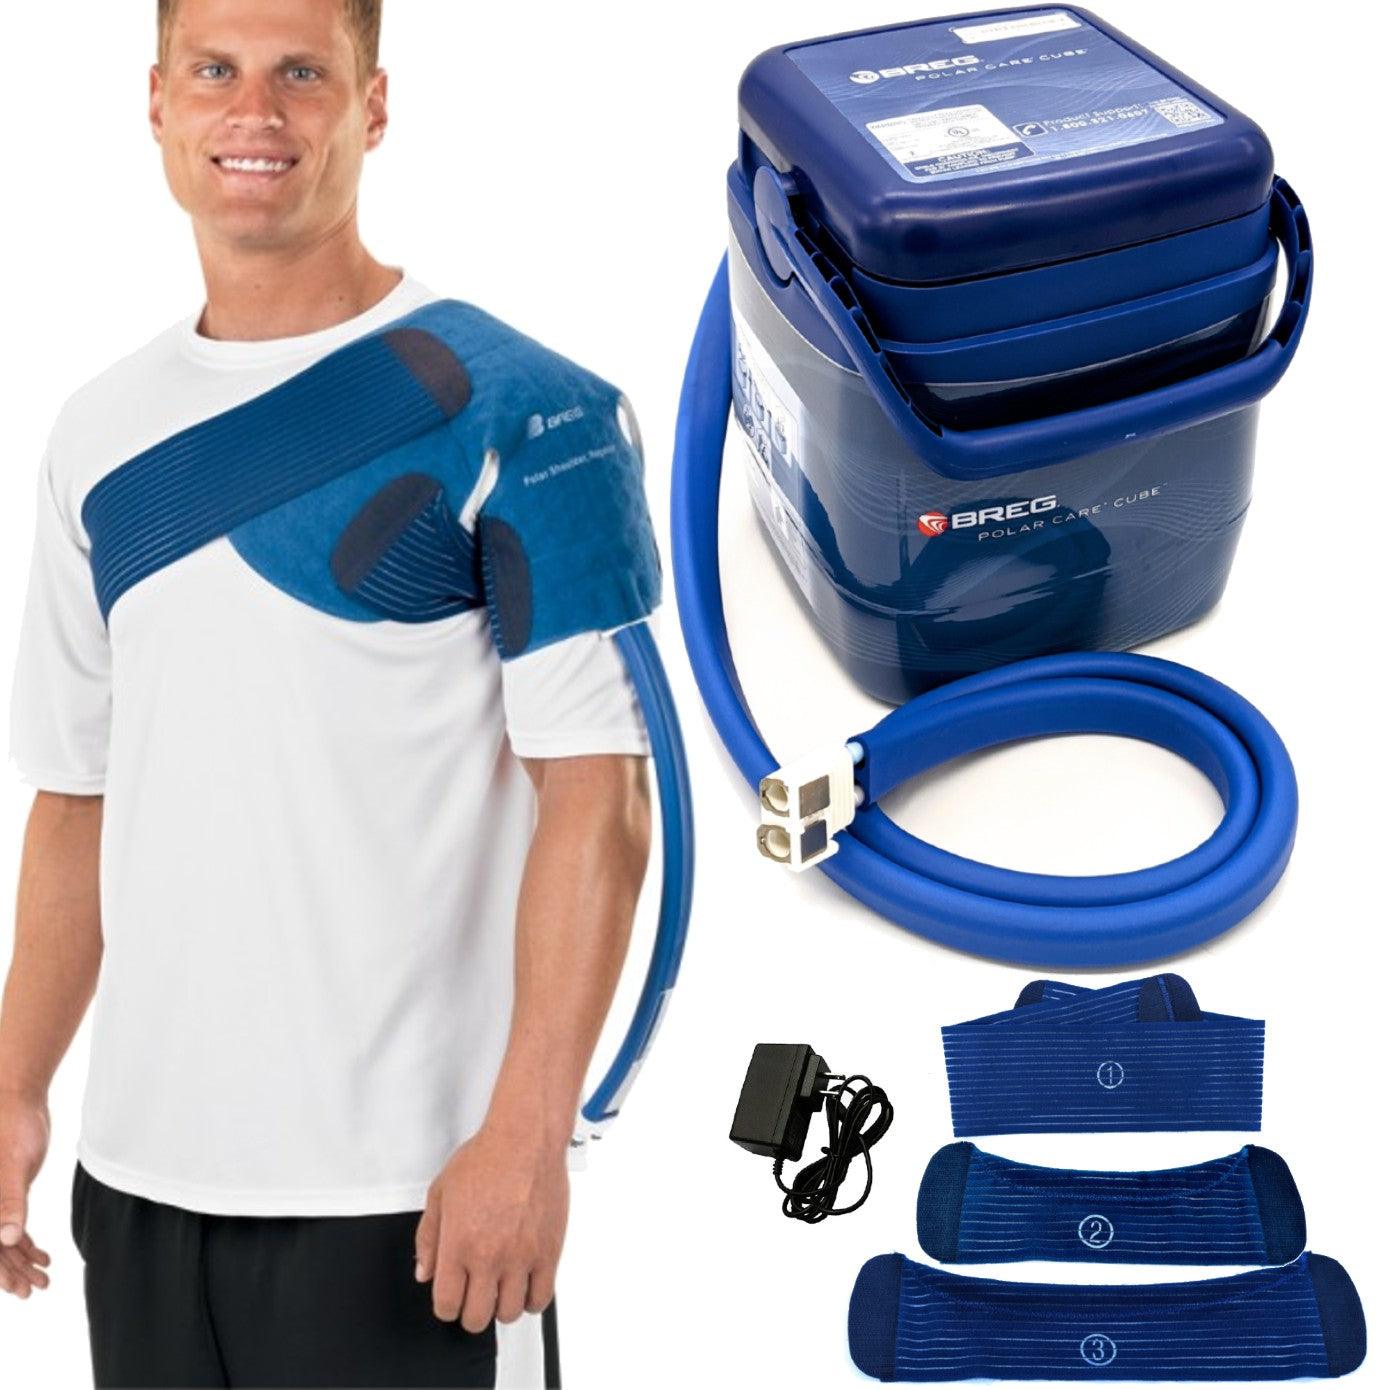 Breg® Polar Care Cube System w/ Wrap-On Pads - 10701-04905 Breg® Polar Care Cube System w/ Wrap-On Pads - undefined by Supply Physical Therapy Breg, Cold Therapy Units, Combos, Cube